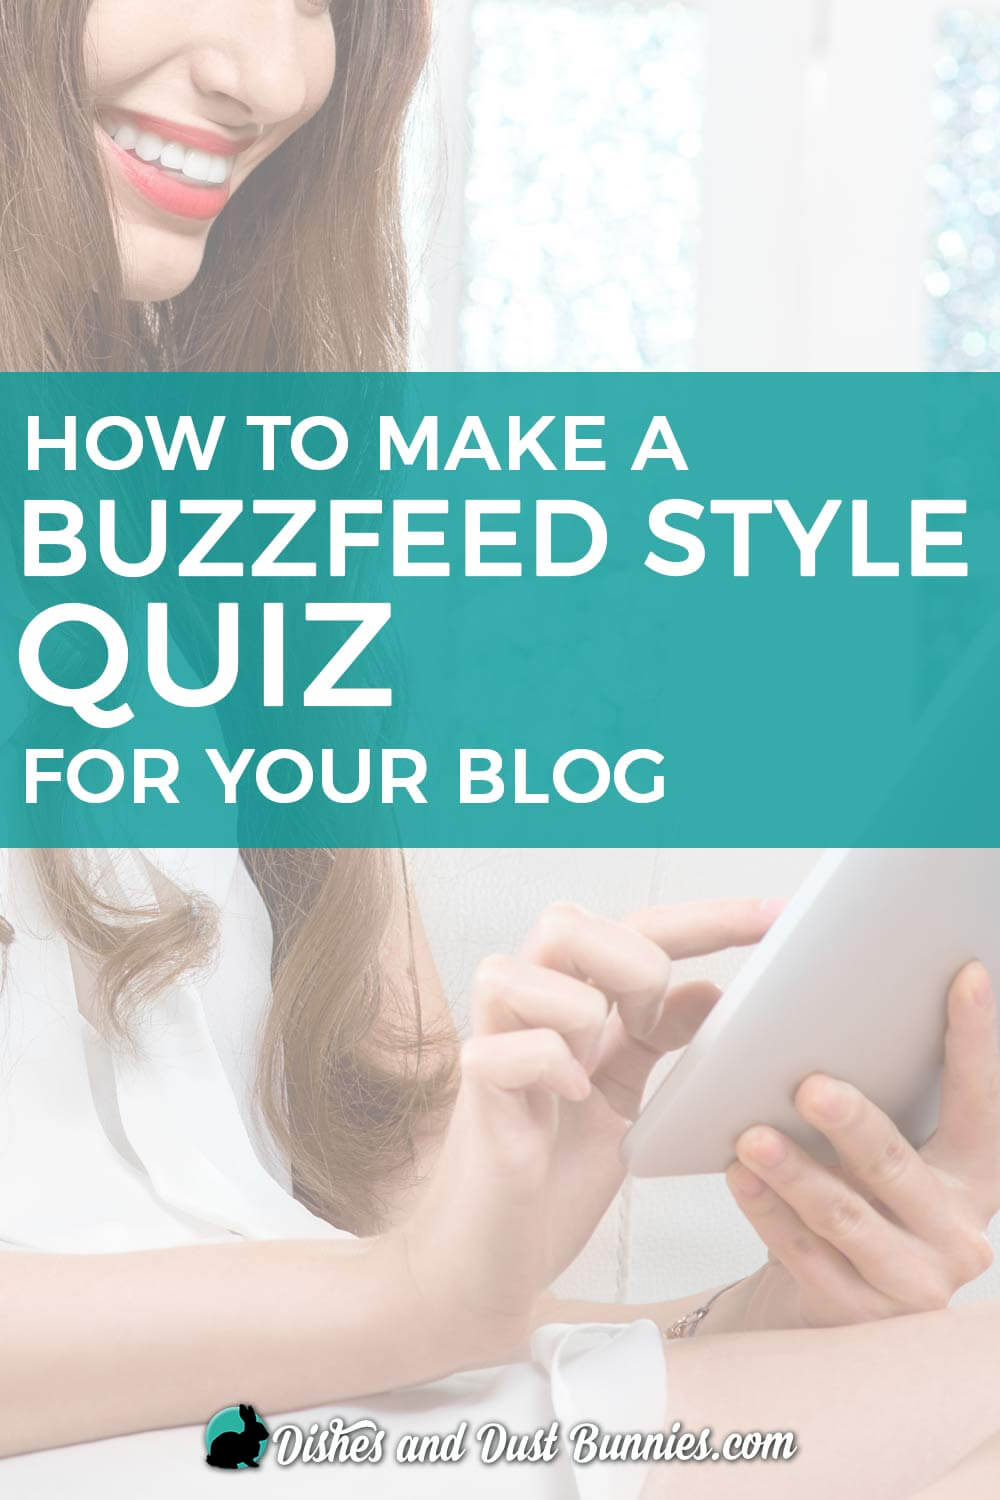 How to Make a Buzzfeed Style Quiz for your Blog - Quick and Easy! - Dishes  & Dust Bunnies